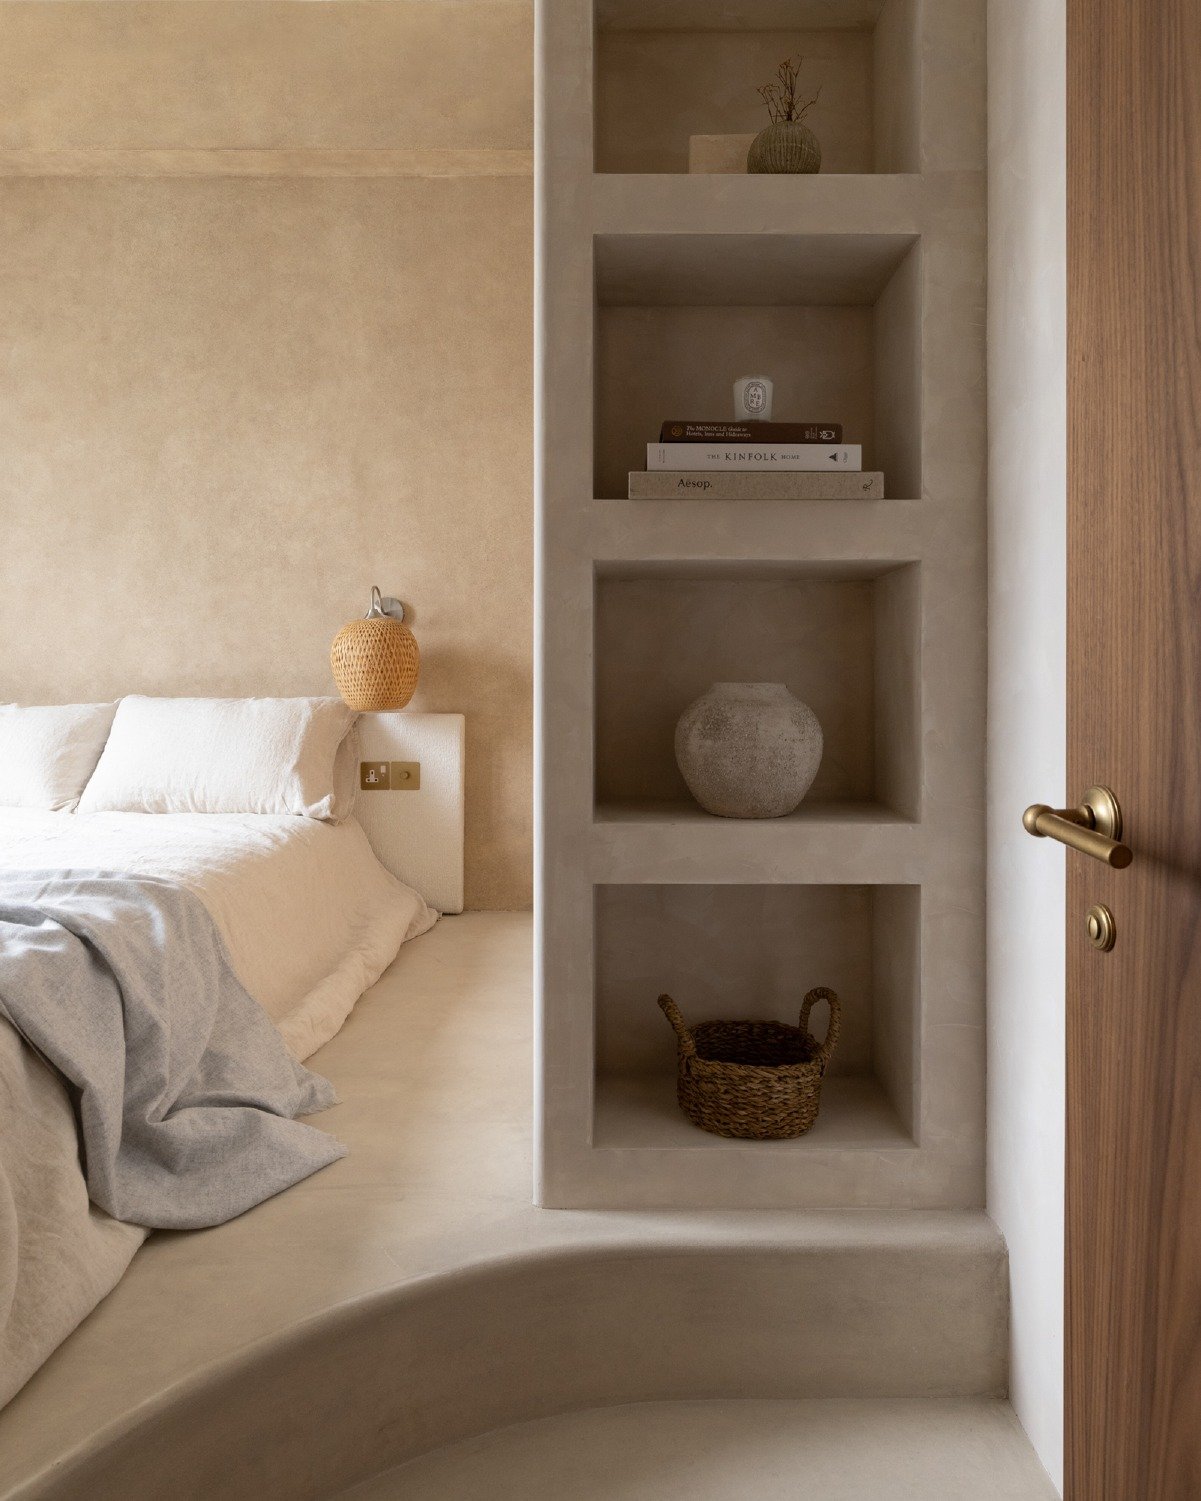 Transitioning through a dome shaped portal, one arrives at the master bedroom where a bespoke display shelf greets you upon entry. Set on a raised platform against a woven velvet fabric headboard, the bed was designed to maximise both storage and com